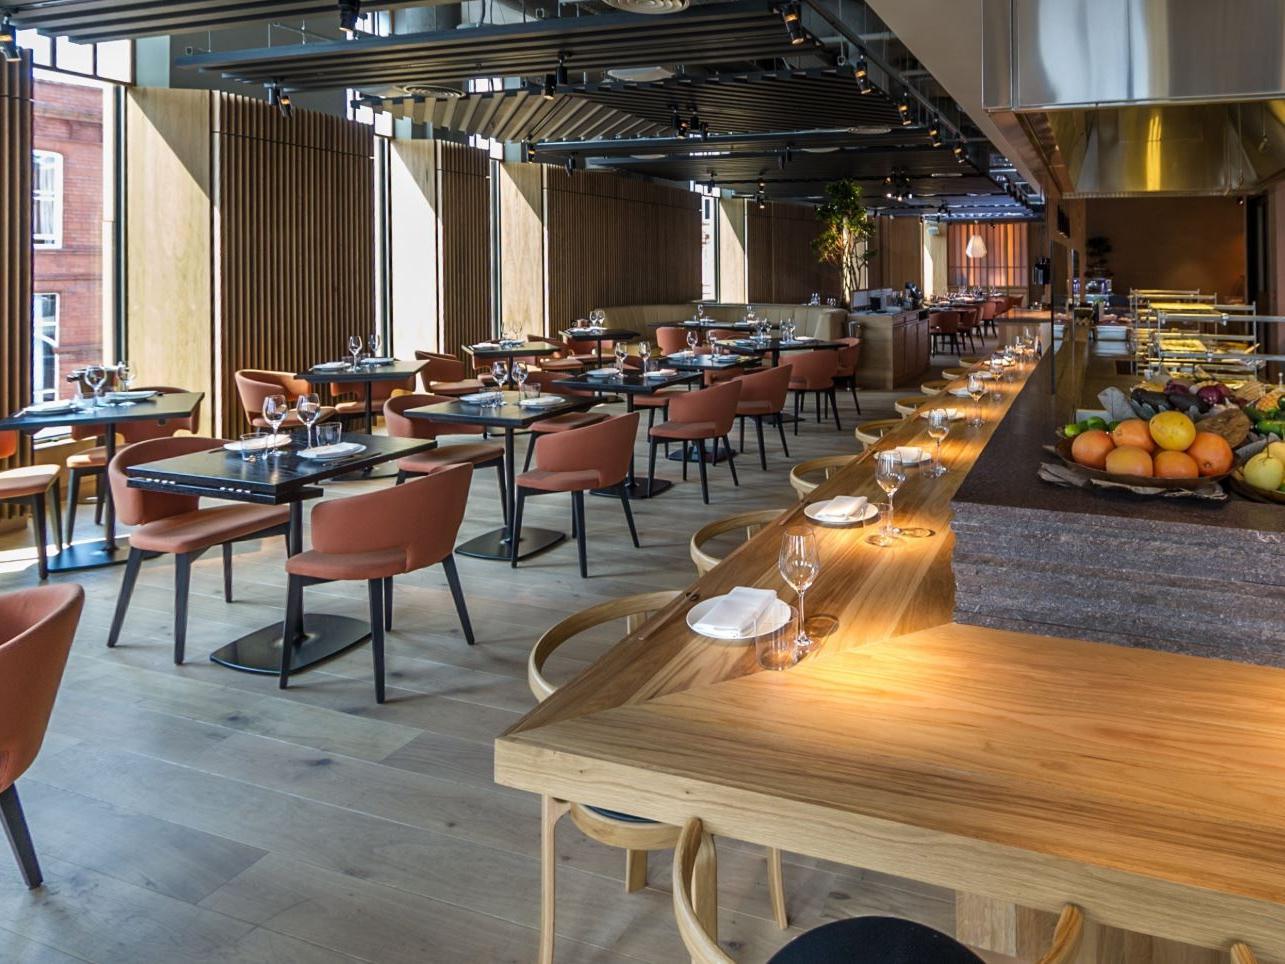 This contemporary Japanese eatery dishes up a bottomless brunch every Sunday, with food served buffet style and hot dishes available on request, along with free-flowing prosecco and a selection of desserts.